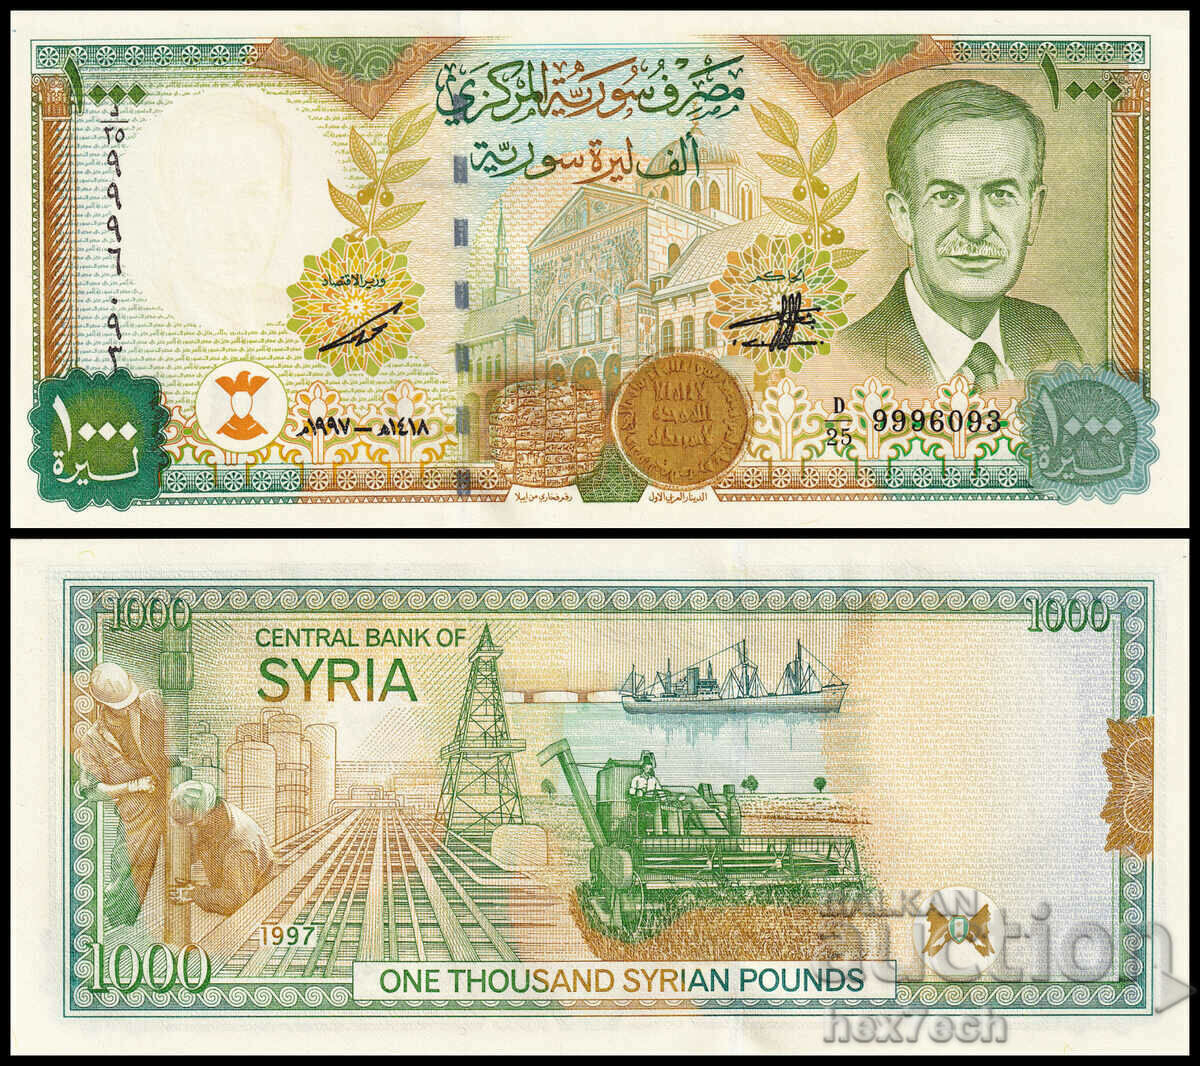 ❤️ ⭐ Syria 1997 1000 pounds UNC new ⭐ ❤️